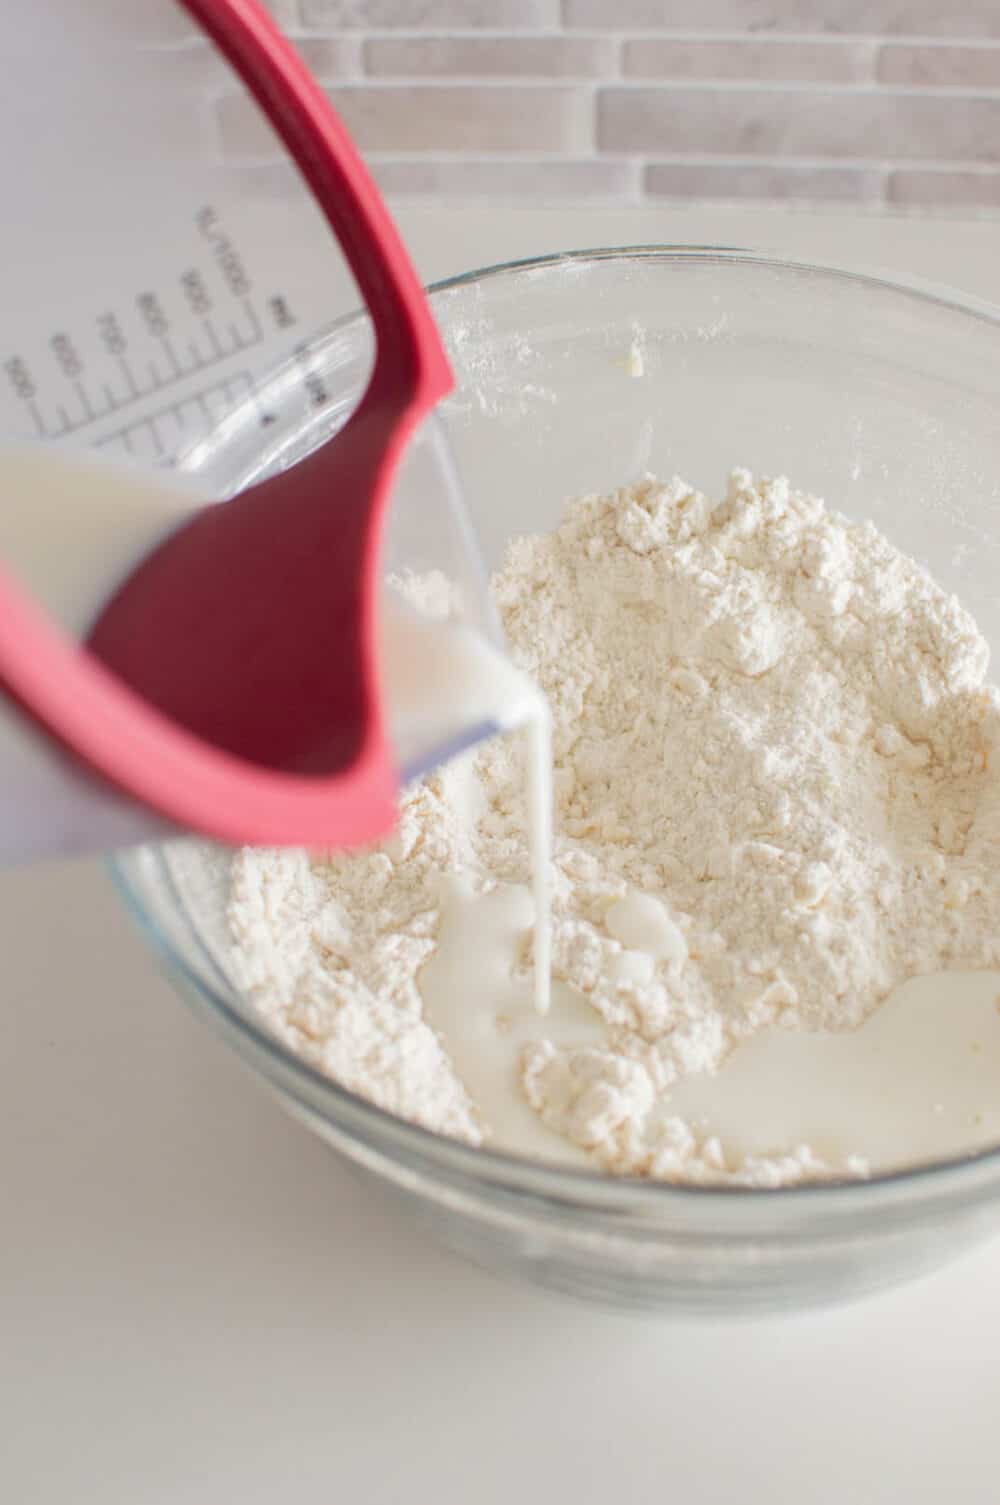 Pouring buttermilk into a glass bowl of dry ingredients